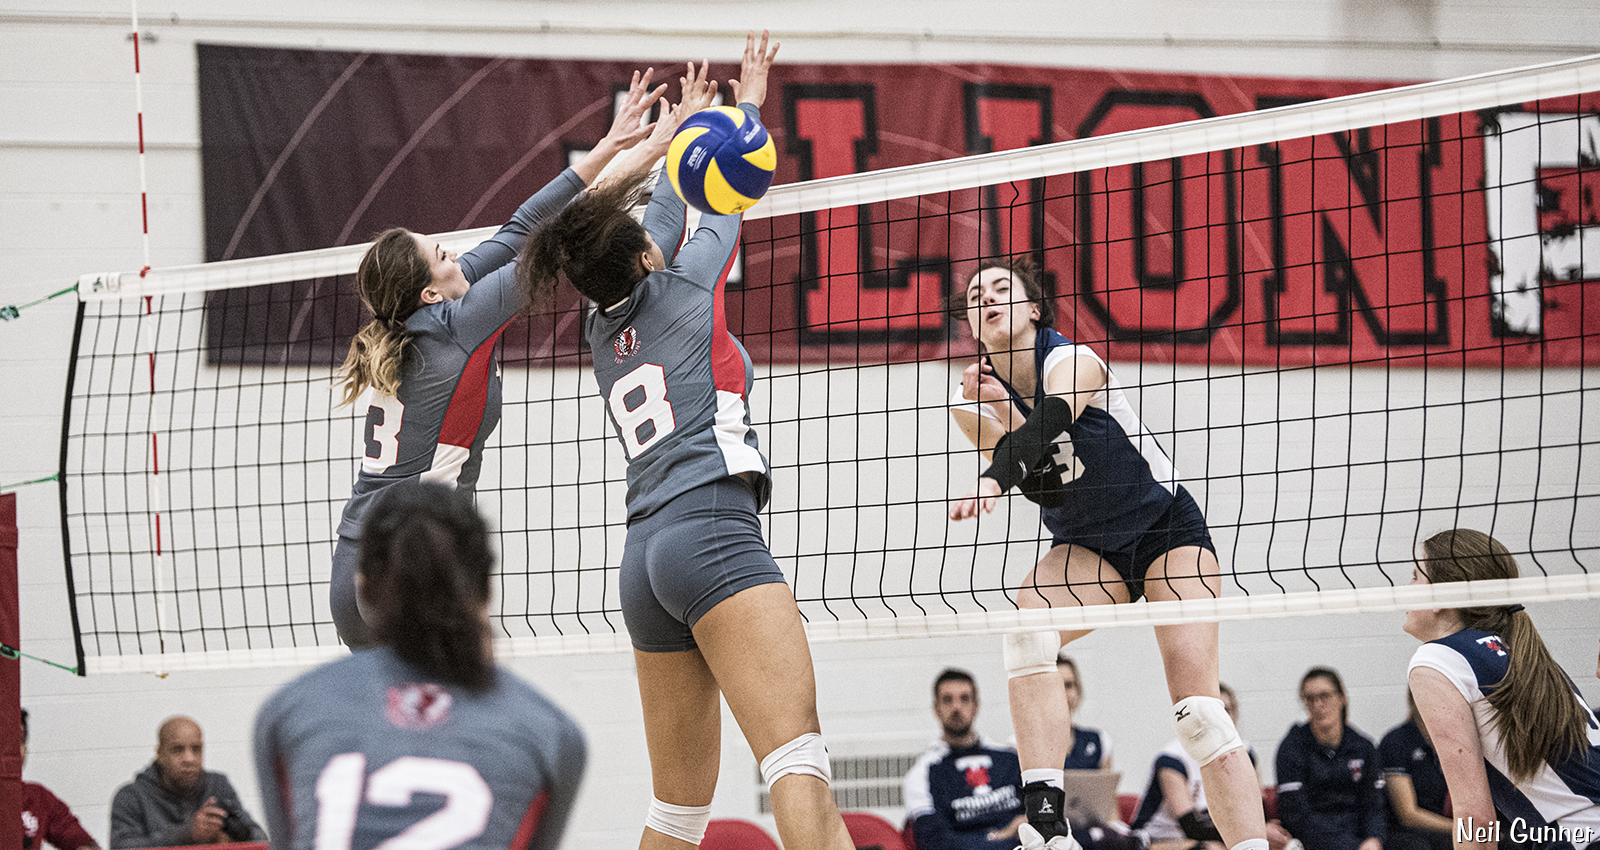 Home Page hero image 5: Volleyball player nails the ball